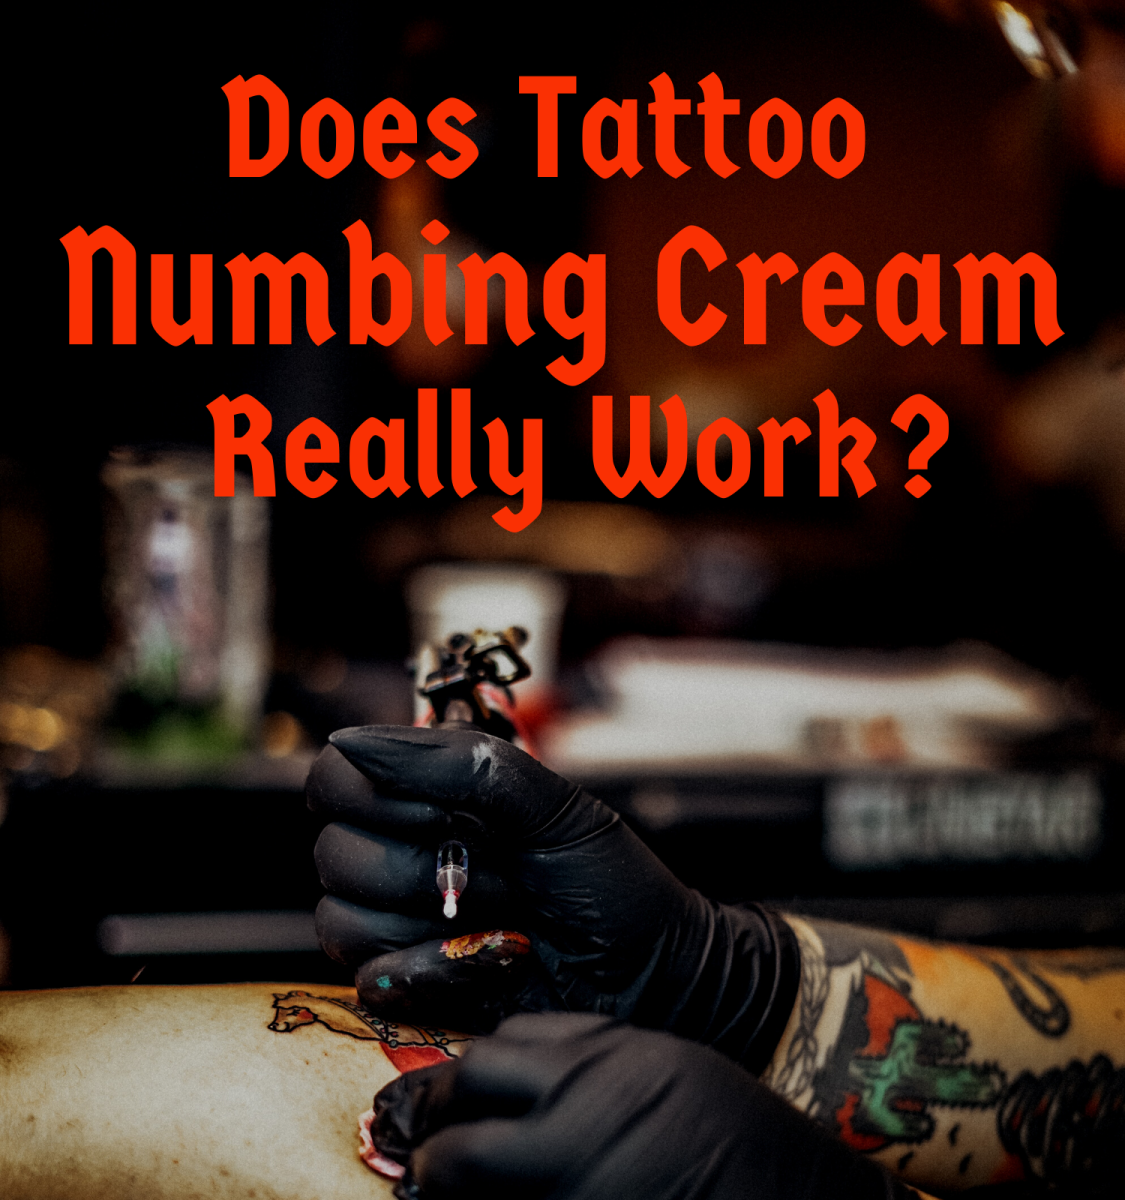 How to Stop Tattoo Pain: Numbing Cream and Dr. Numb